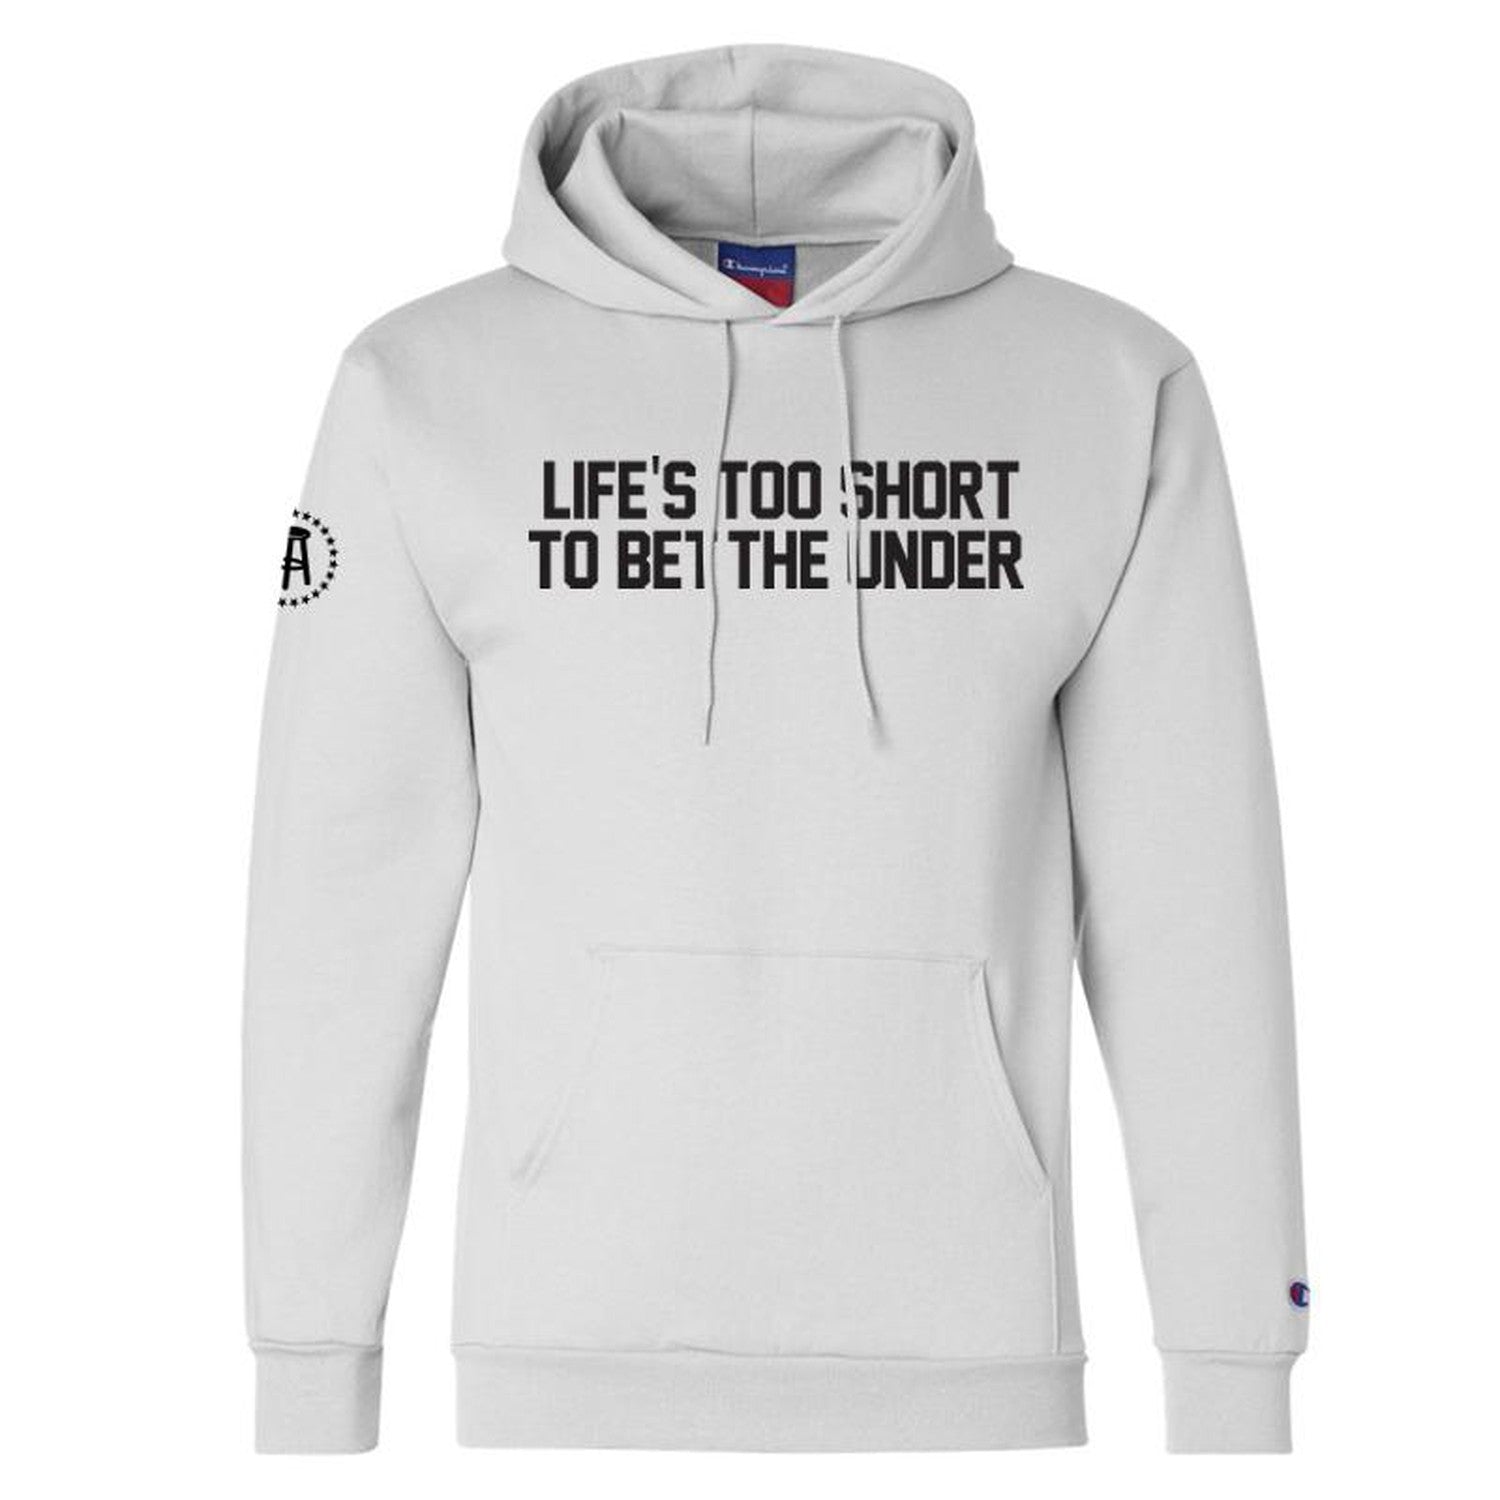 Life's Too Short to Bet The Under Hoodie | Barstool Sports White